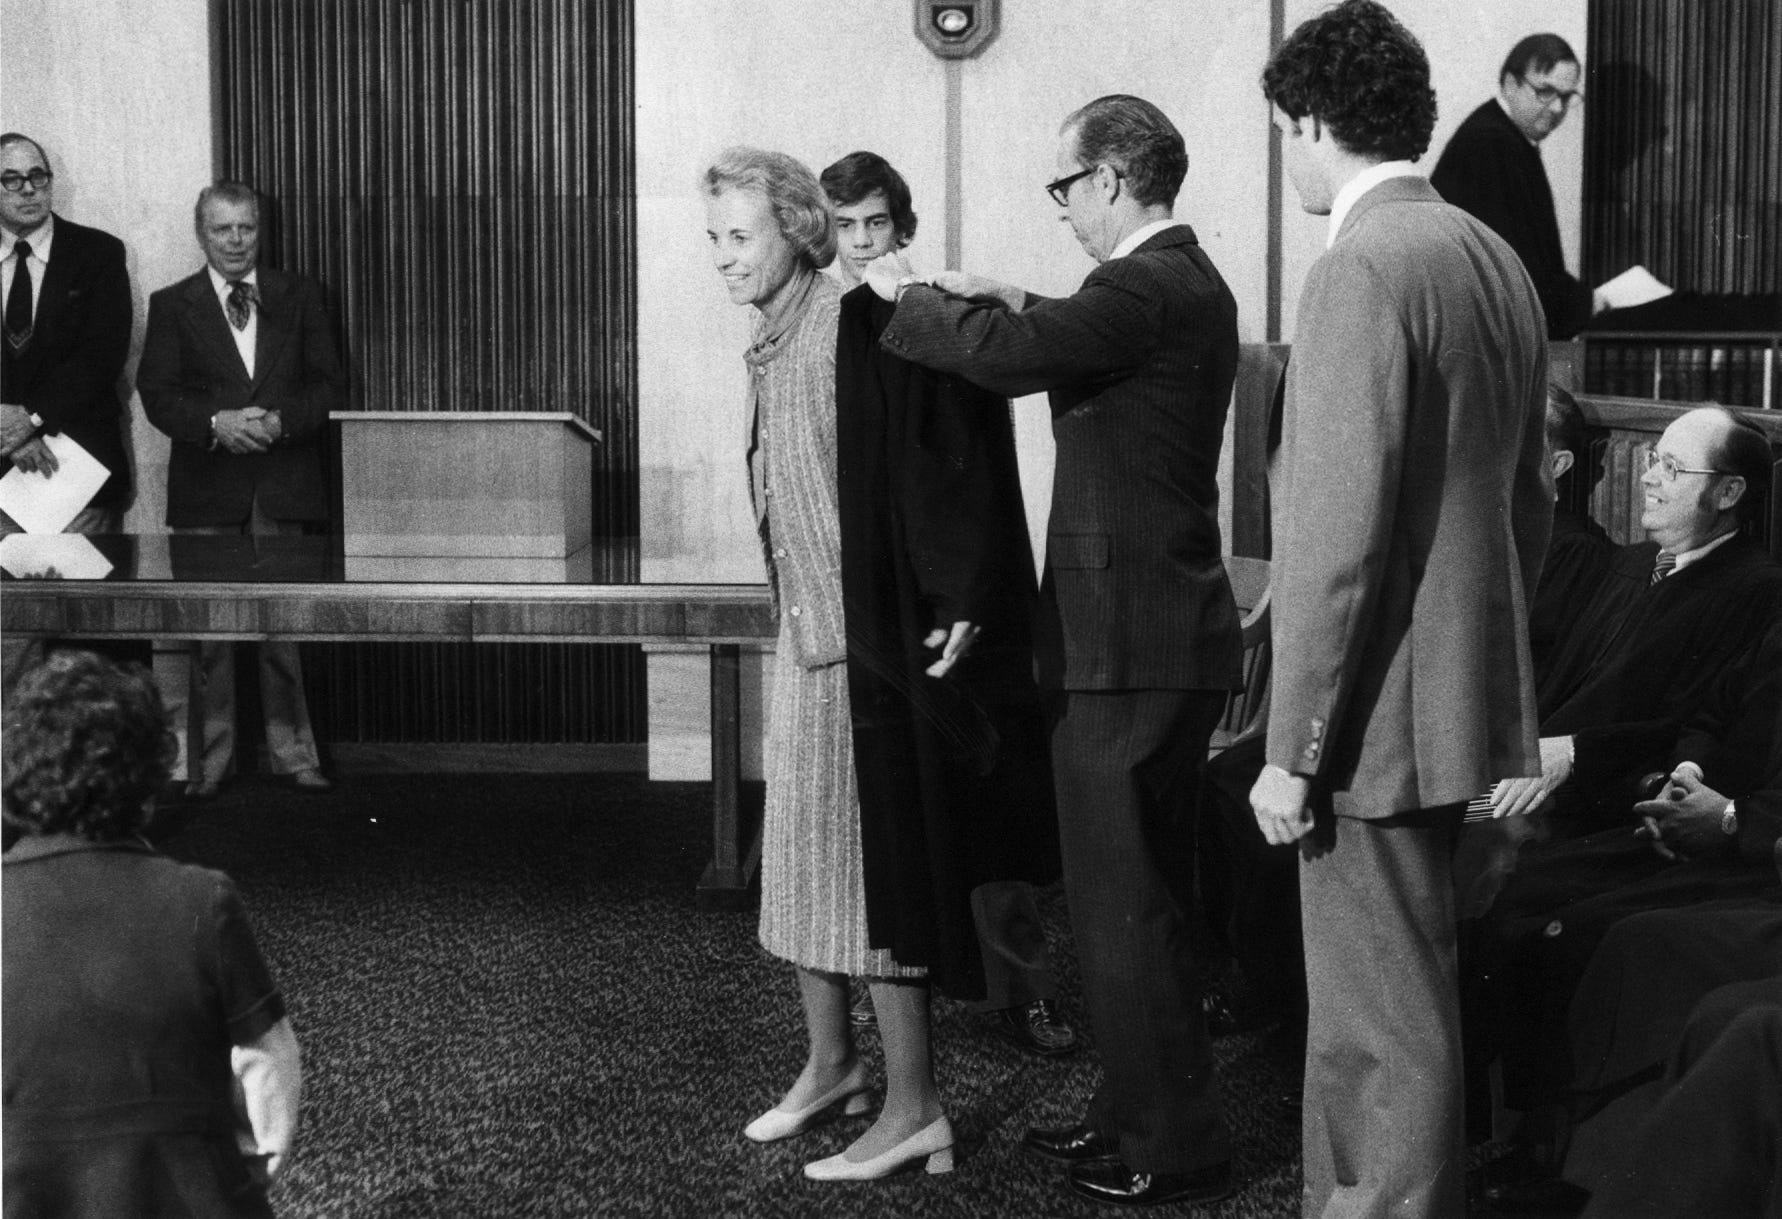 New Court of Appeals Judge Sandra Day O'Connor is helped into her robe by her husband, John, after swearing-in ceremonies at the Arizona Supreme Court on Dec. 4, 1979. O'Connor was a Maricopa County Superior Court judge until being appointed to the state bench by Gov. Bruce Babbitt.